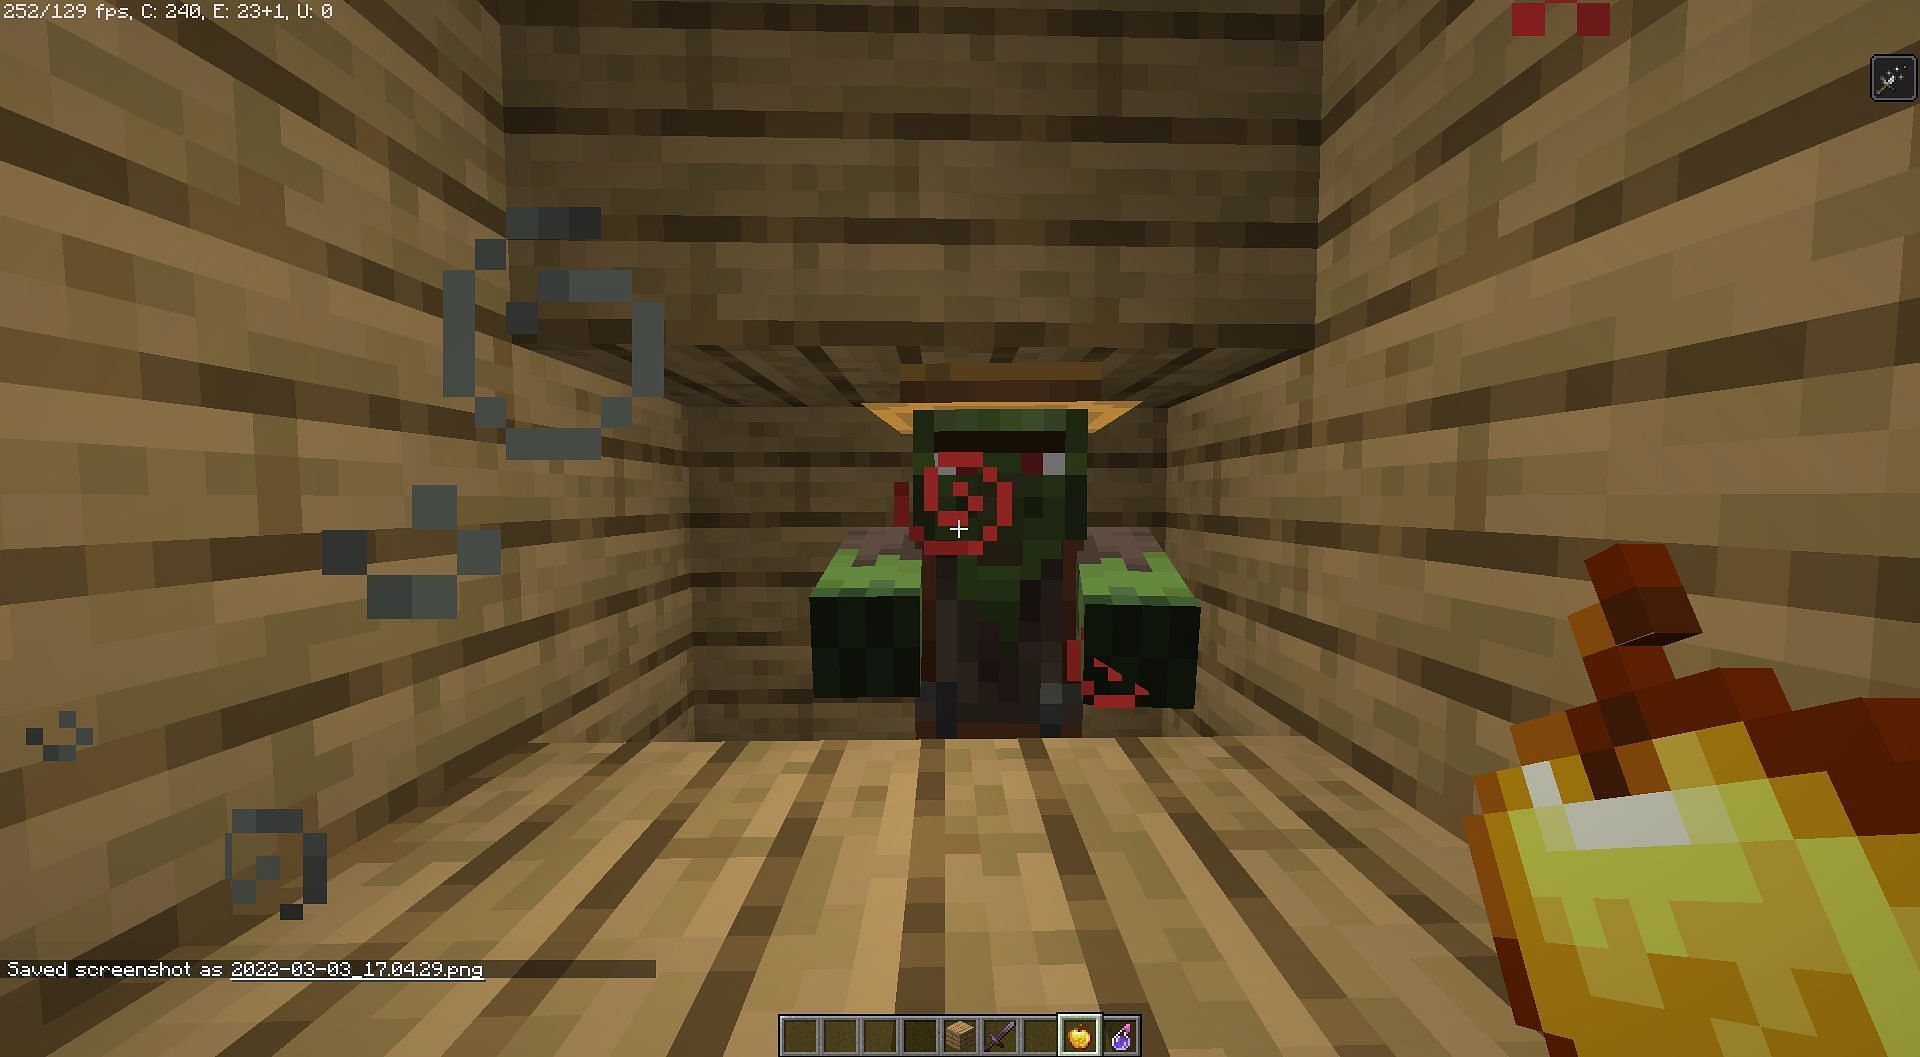 Curing them with weakness potion and golden apple (Image via Minecraft)